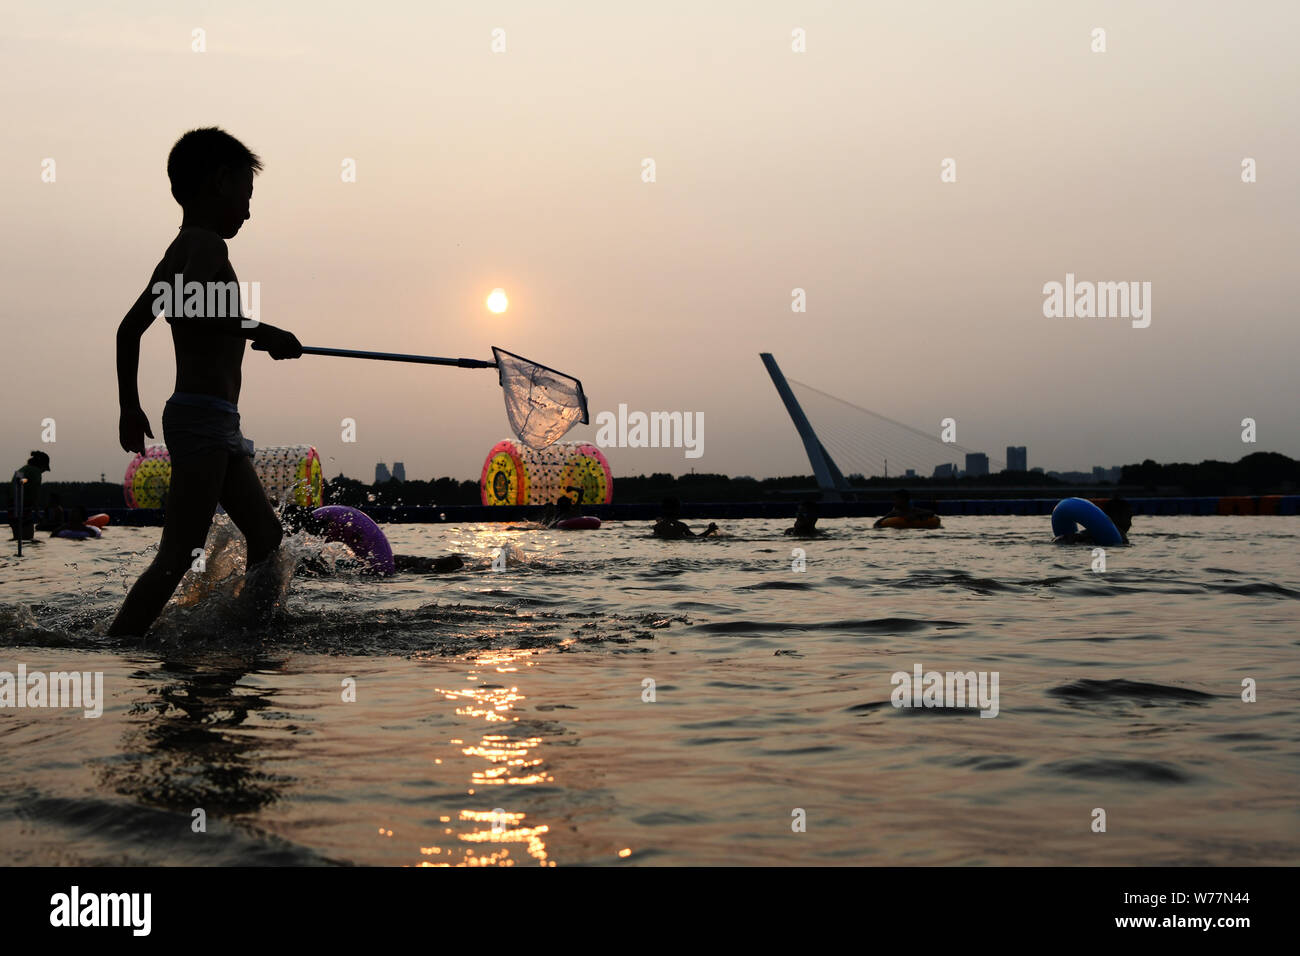 (190805) -- HARBIN, Aug. 5, 2019 (Xinhua) -- A kid plays along the Songhua River in Harbin, capital of northeast China's Heilongjiang Province. Attracted by the coolness in summer, many tourists come to Harbin for vacation. Meanwhile, Harbin is a city of music for the locals who got in touch with European classical music in an earlier time in China. With the cool summer and rich culture, Harbin received 36.23 million tourists and made revenue of 60.7 billion yuan (8.6 billion U.S. dollars) in the summer of 2018. (Xinhua/Wang Jianwei) Stock Photo